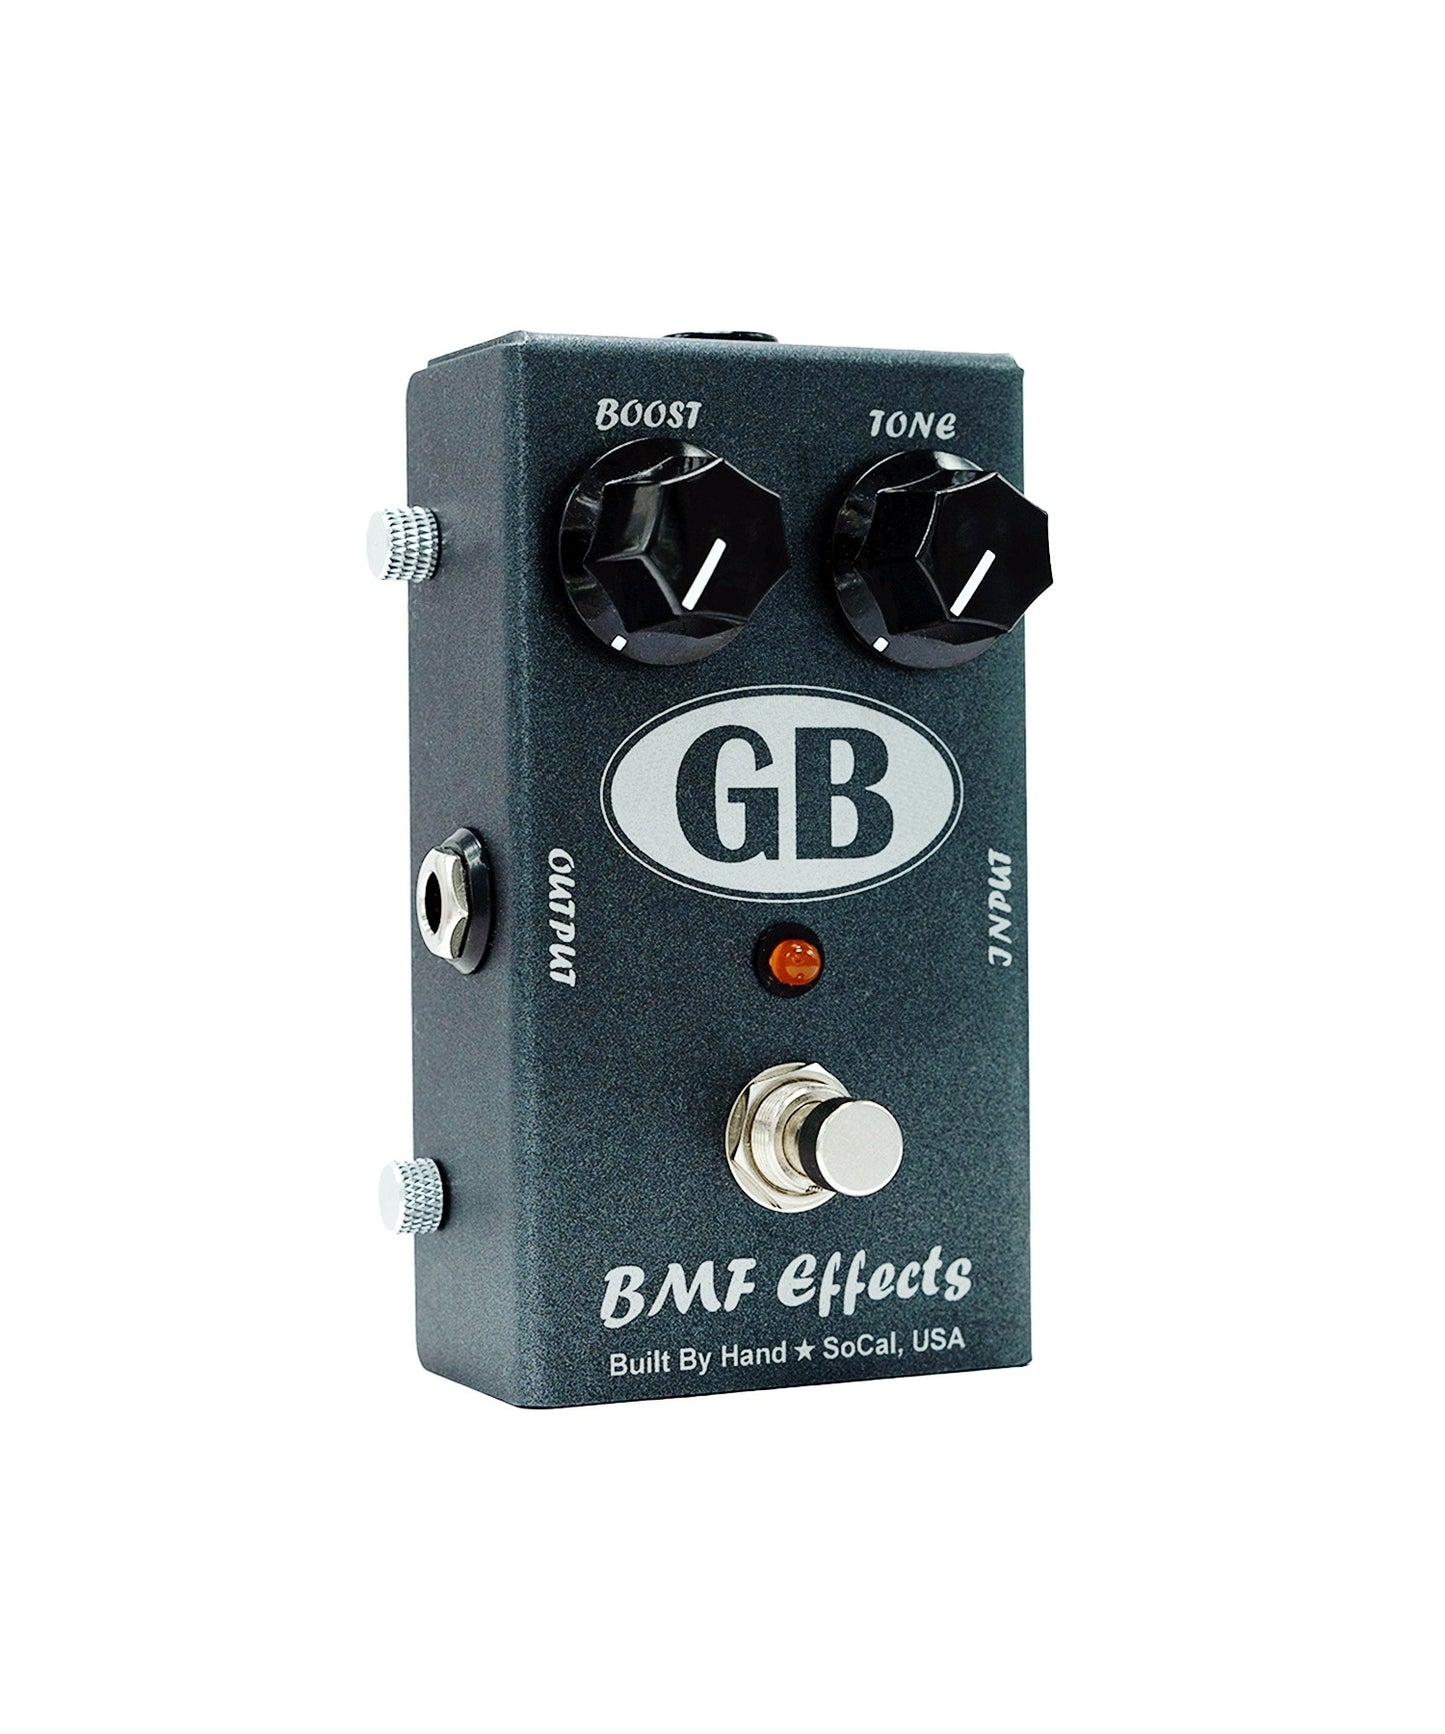 GB Boost Germanium Booster Limited Edition